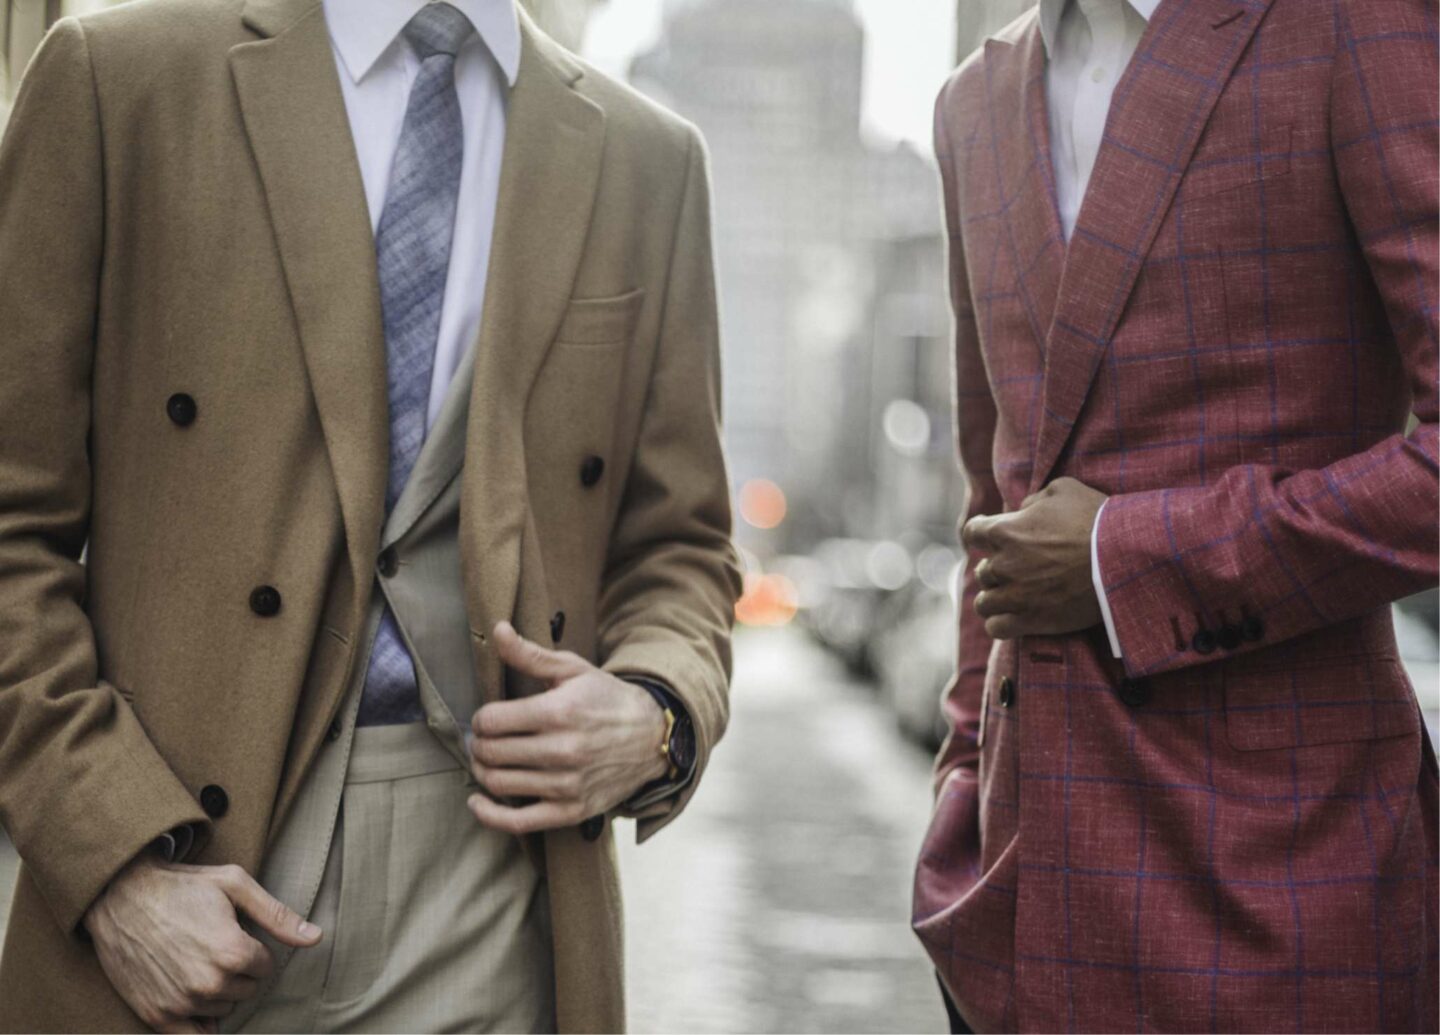 All of Hartter Manly's suits come with half canvas as standard. Image shows two men in suits and overcoats with half and full canvas interlining.